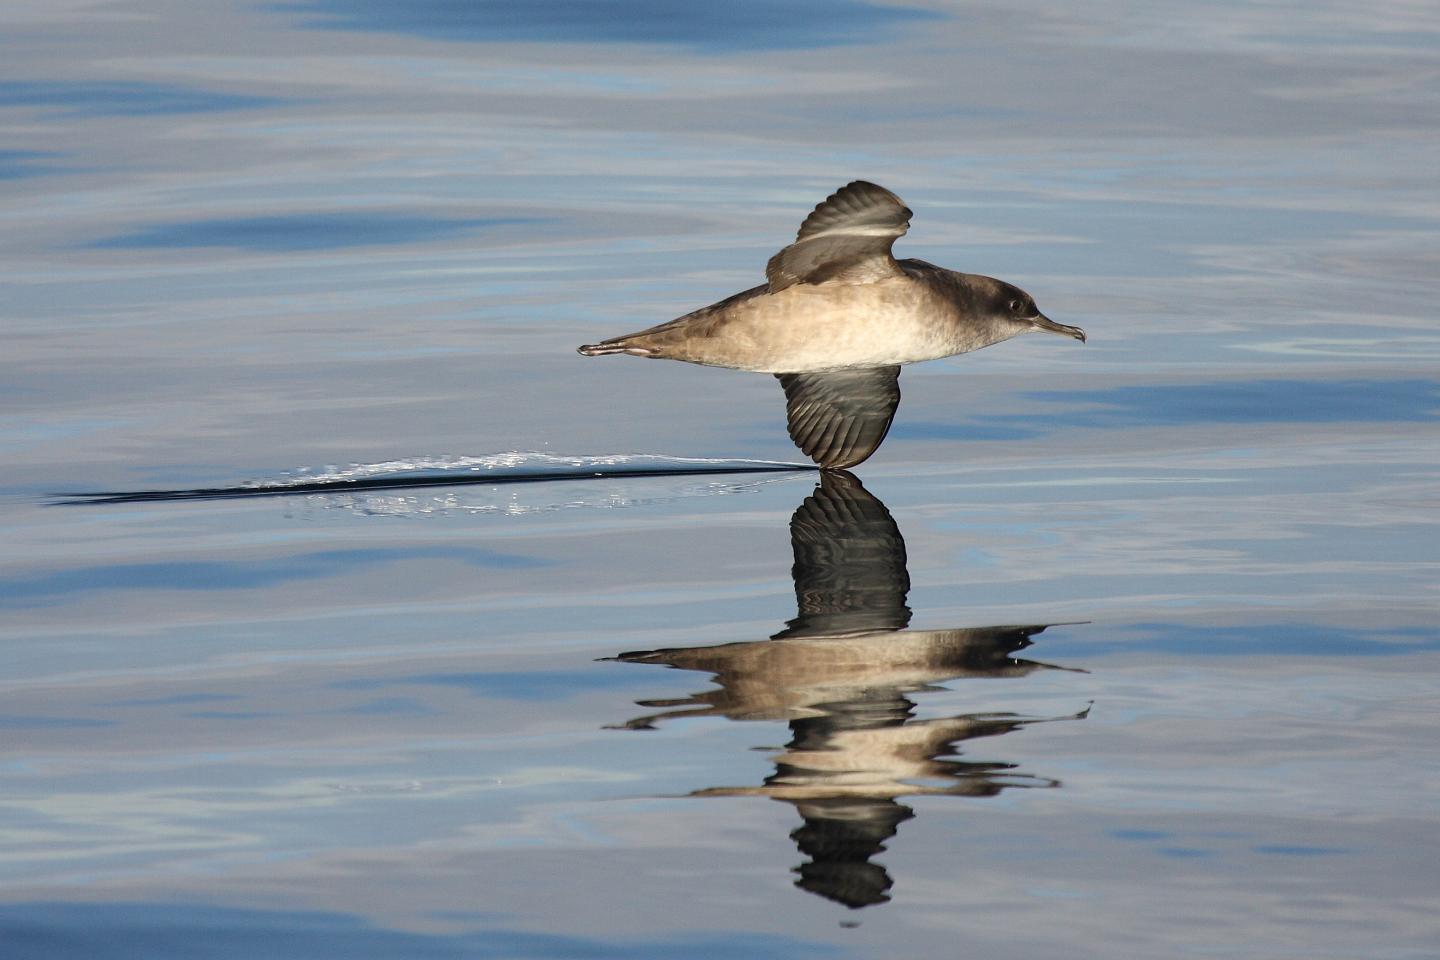 Light Pollution Threatens the Balearic Shearwater